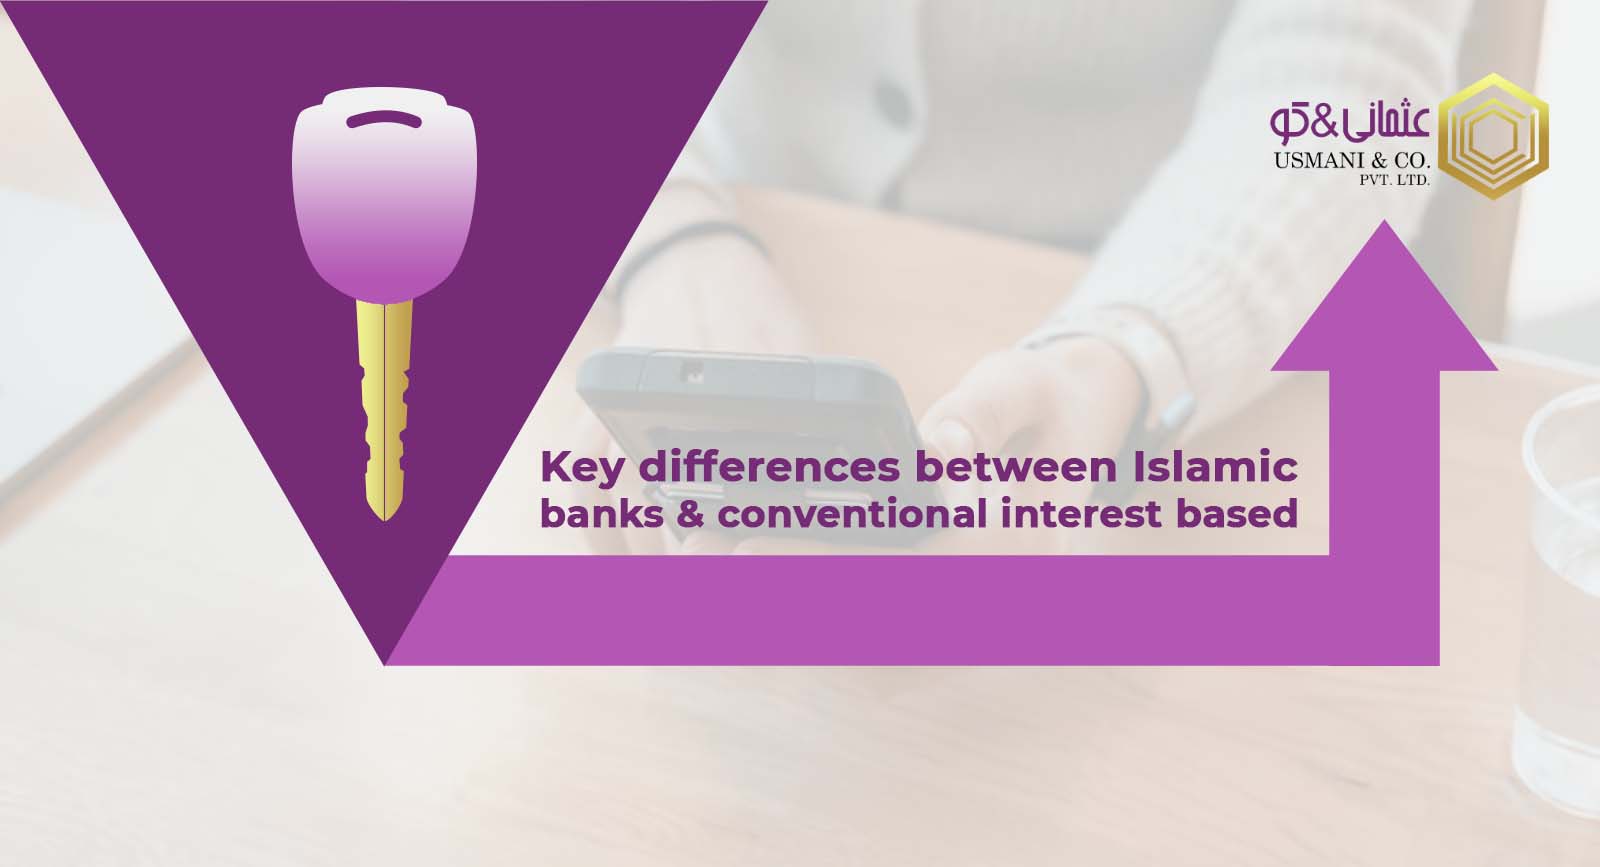 Key differences between Islamic banks & conventional interest based banks